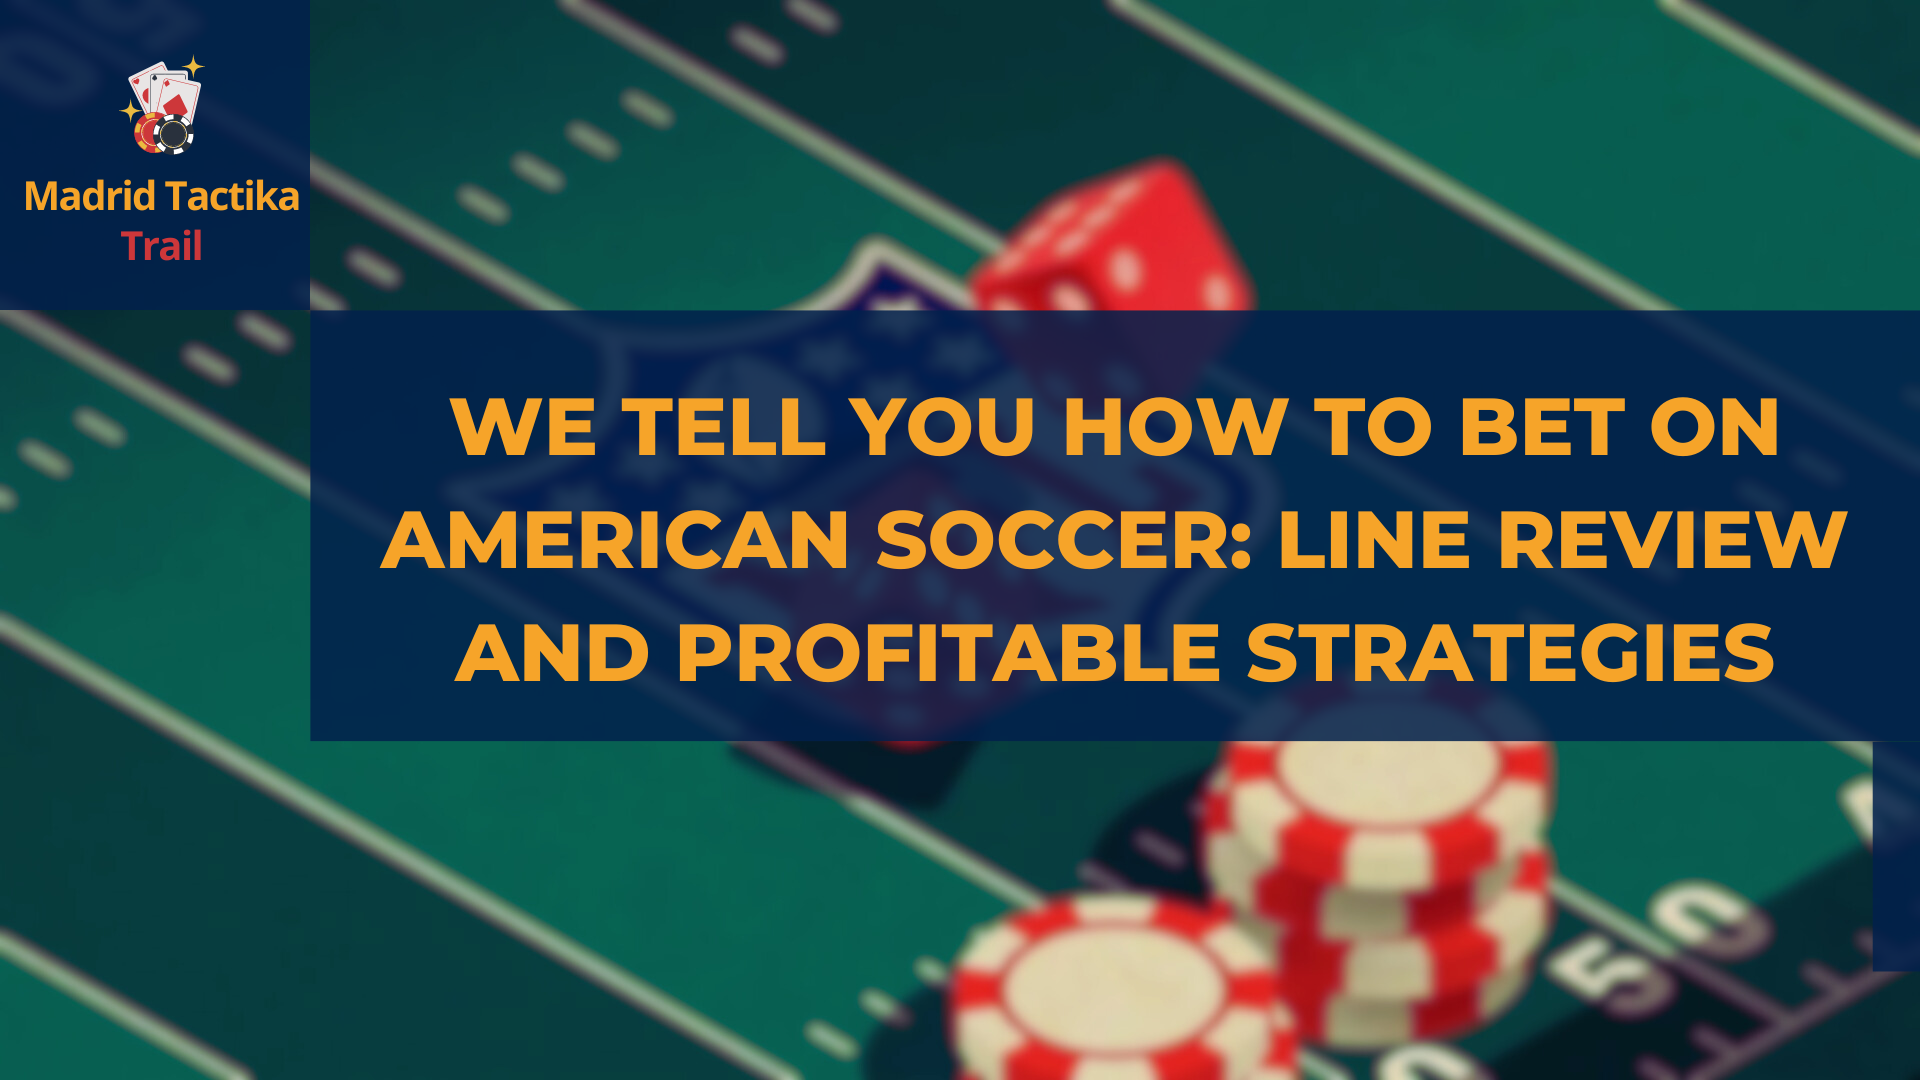 We tell you how to bet on American soccer: line review and profitable strategies